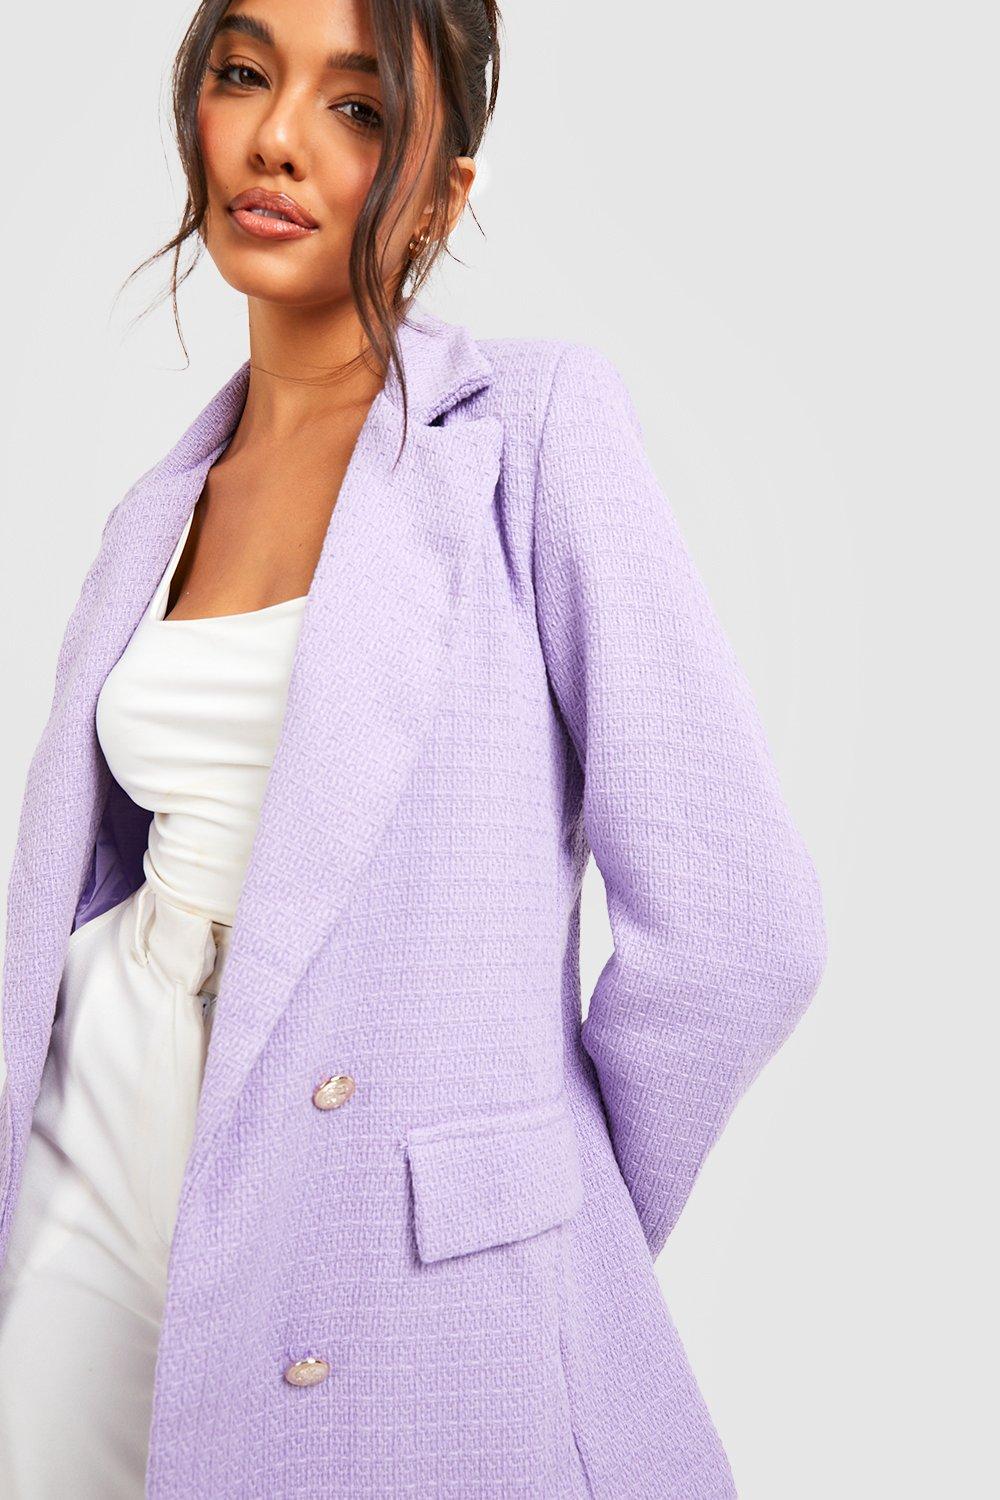 sport coats and suit jackets Boohoo Cotton Premium Boucle Double Breasted Blazer in Lilac Purple Womens Clothing Jackets Blazers 